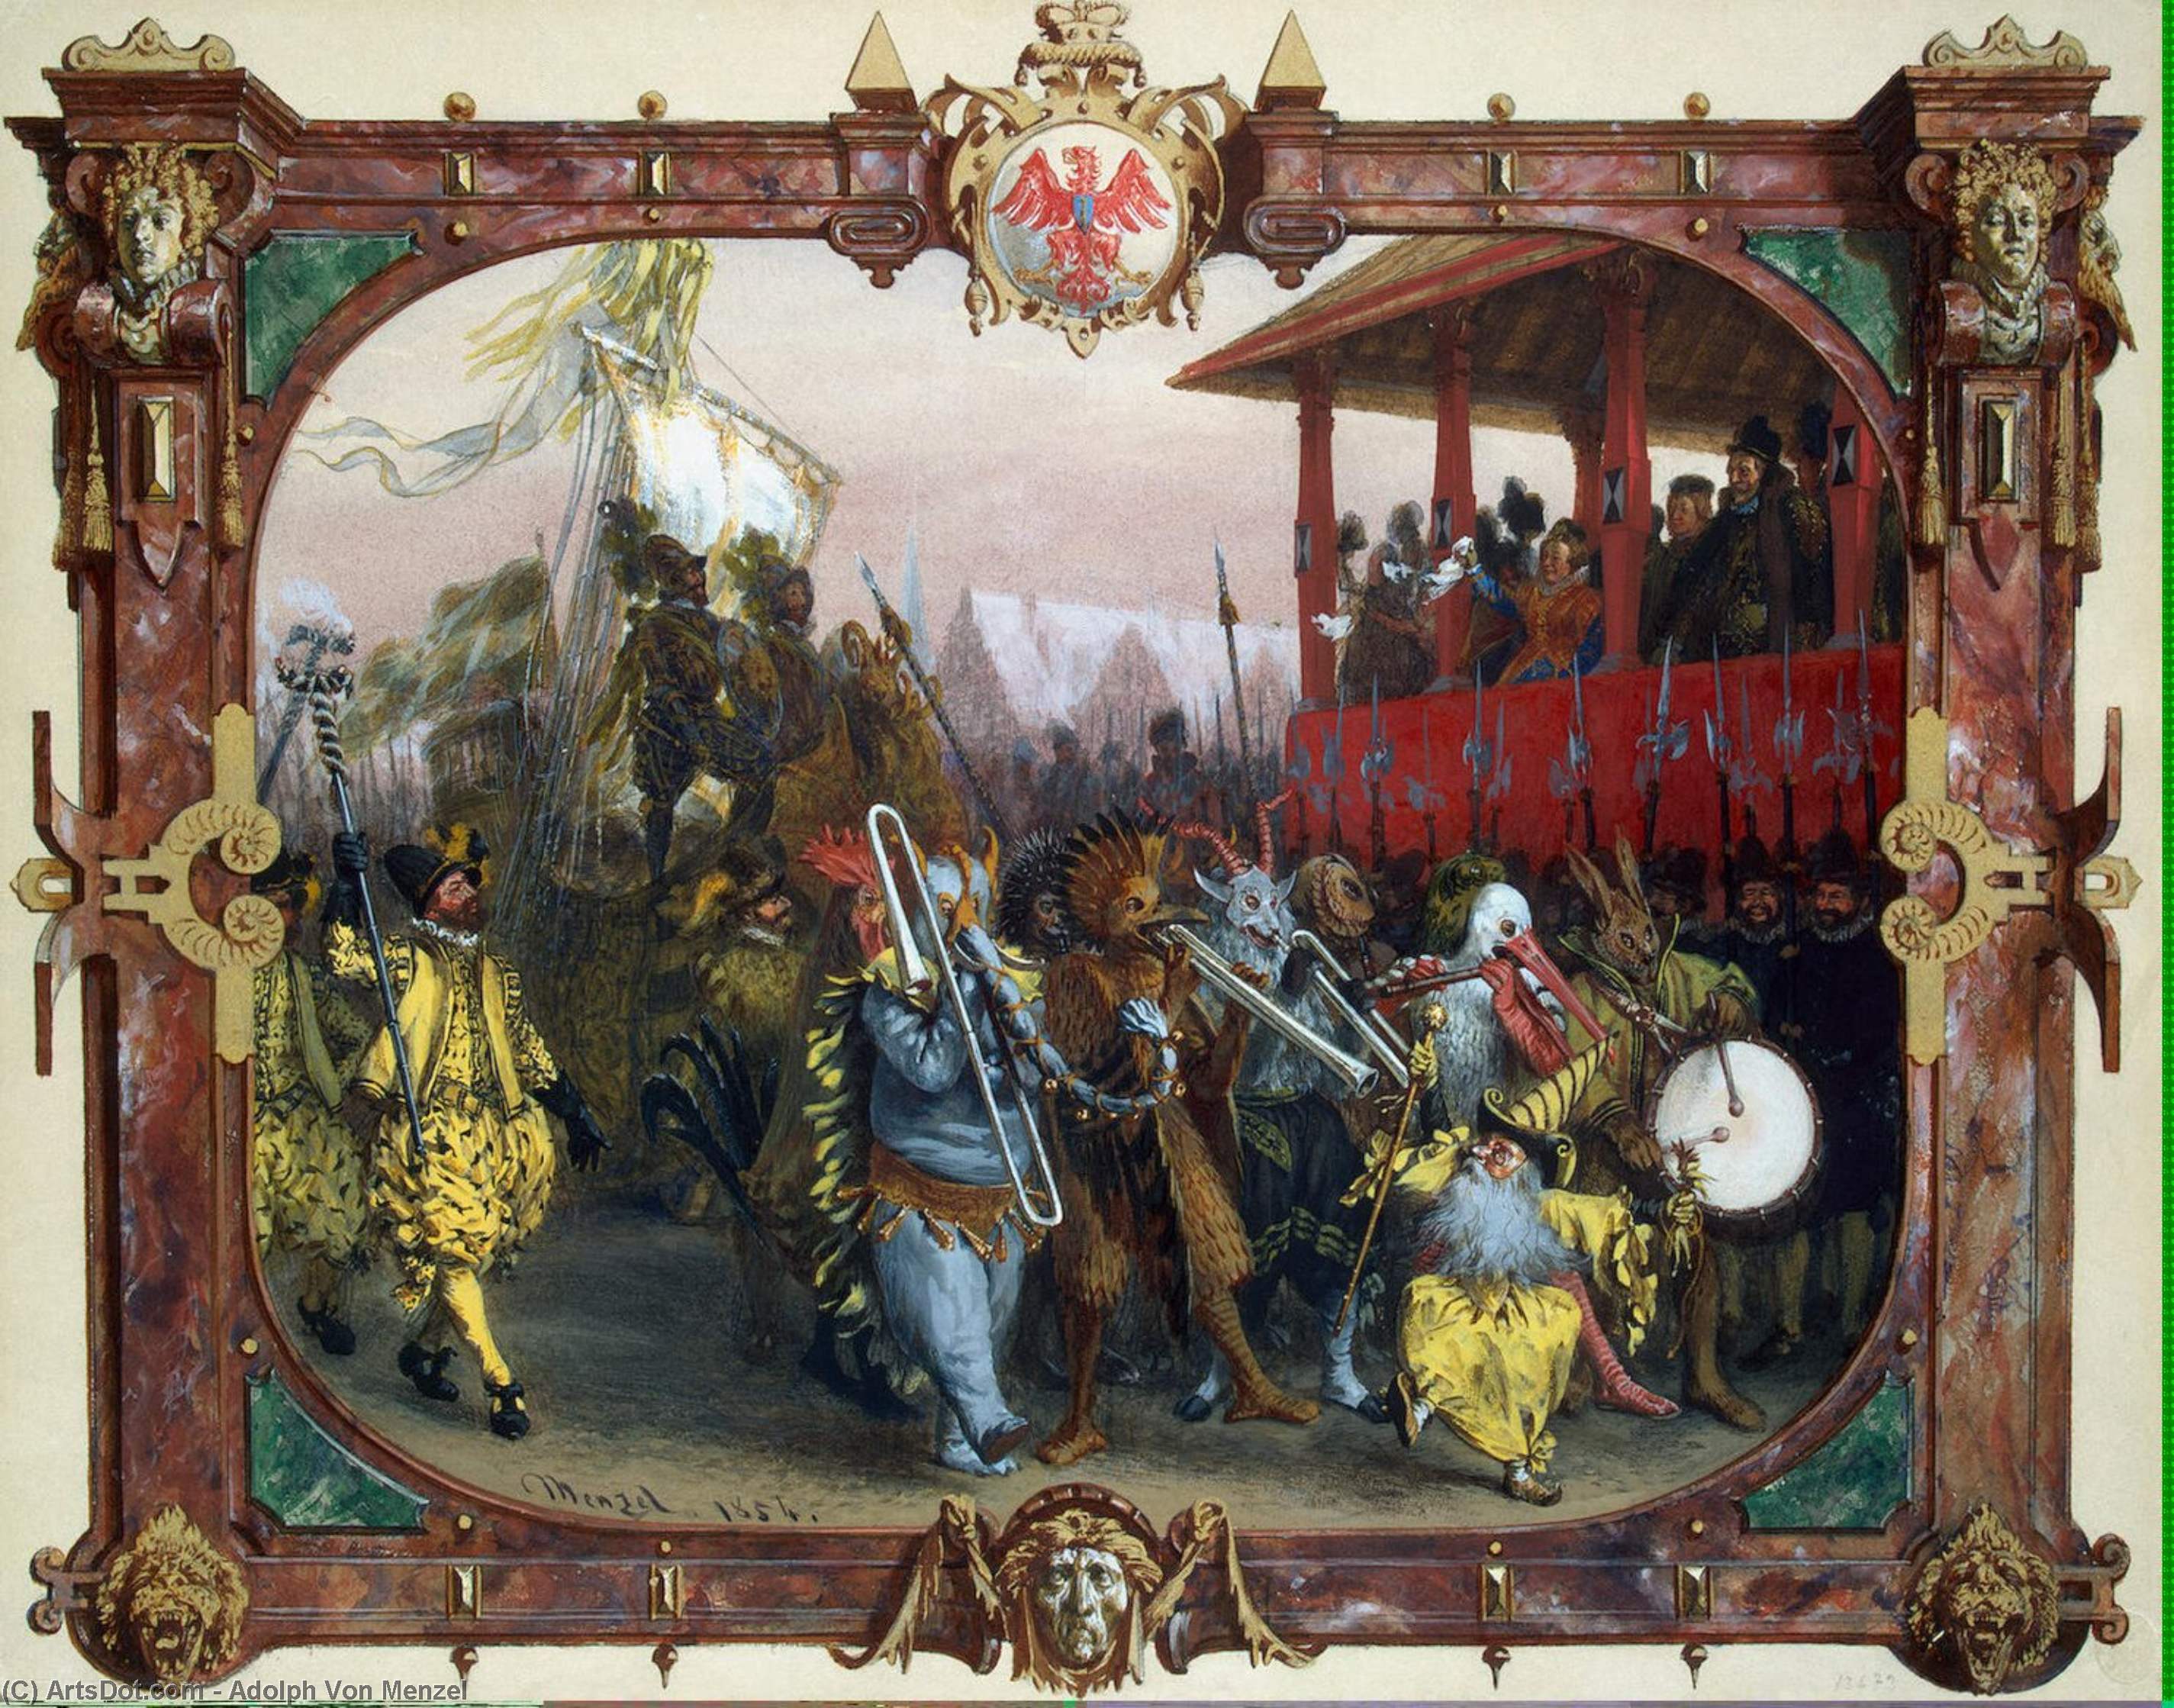 Buy Museum Art Reproductions Festive Procession and Tournament in Berlin in 1592 under the Leadership of Johann Georg of Branderburg by Adolph Menzel | ArtsDot.com